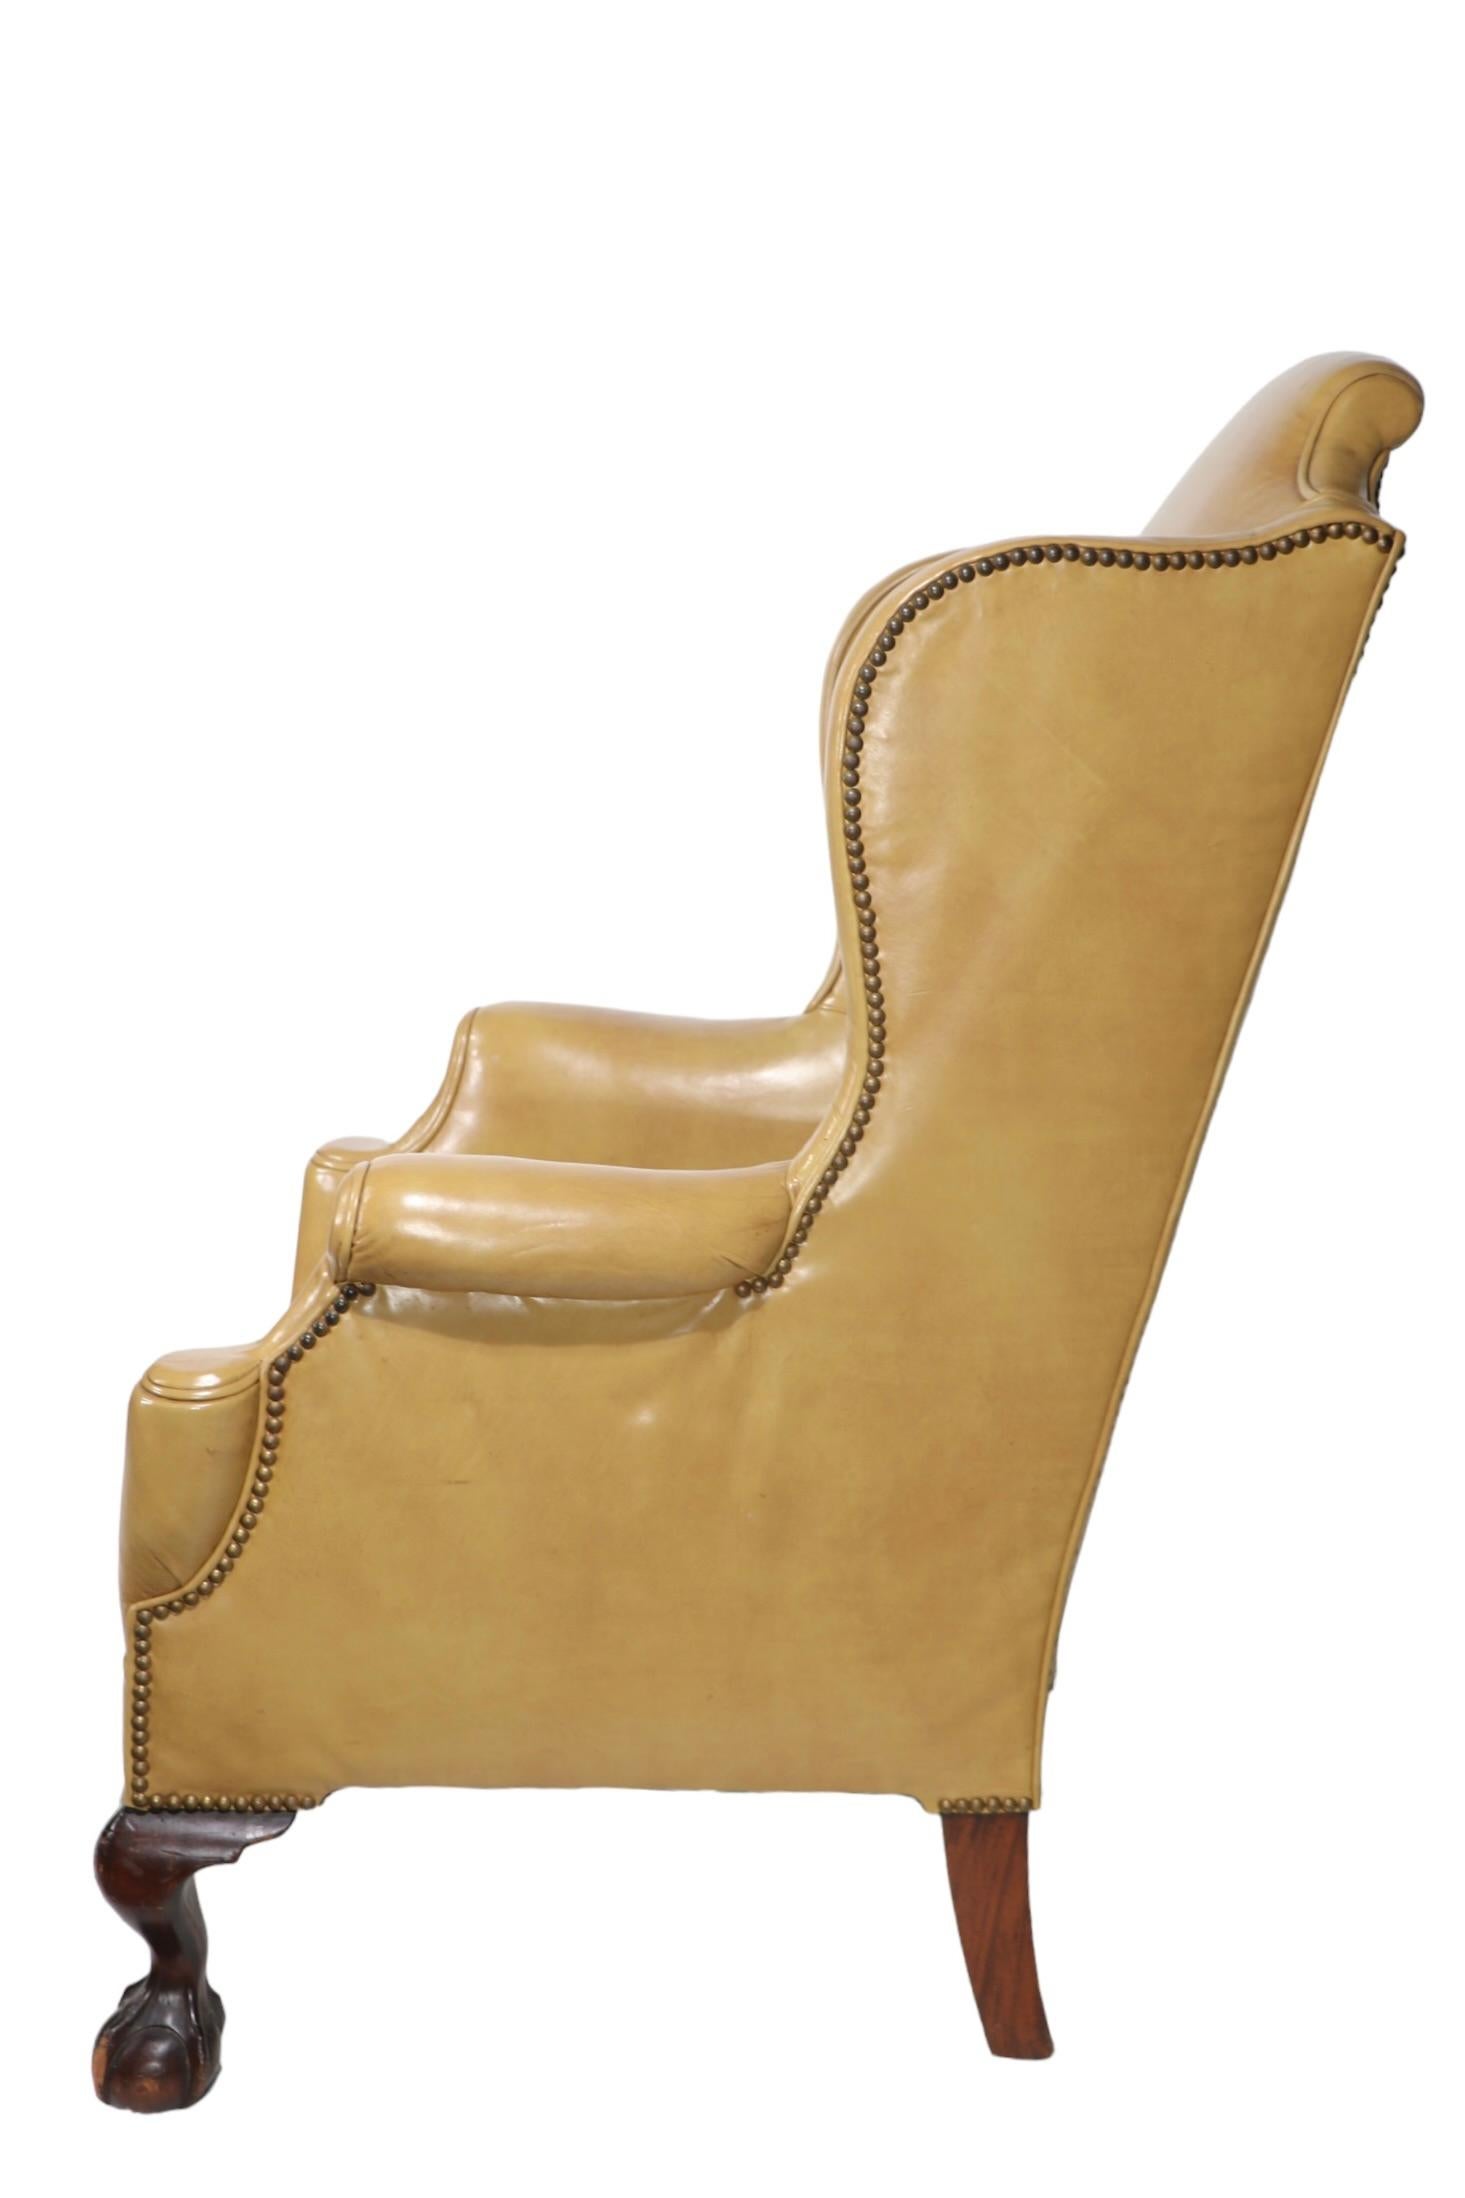 Pr. Leather Wingback Chairs with Ball and Claw Feet and  Nailhead Studs  For Sale 8